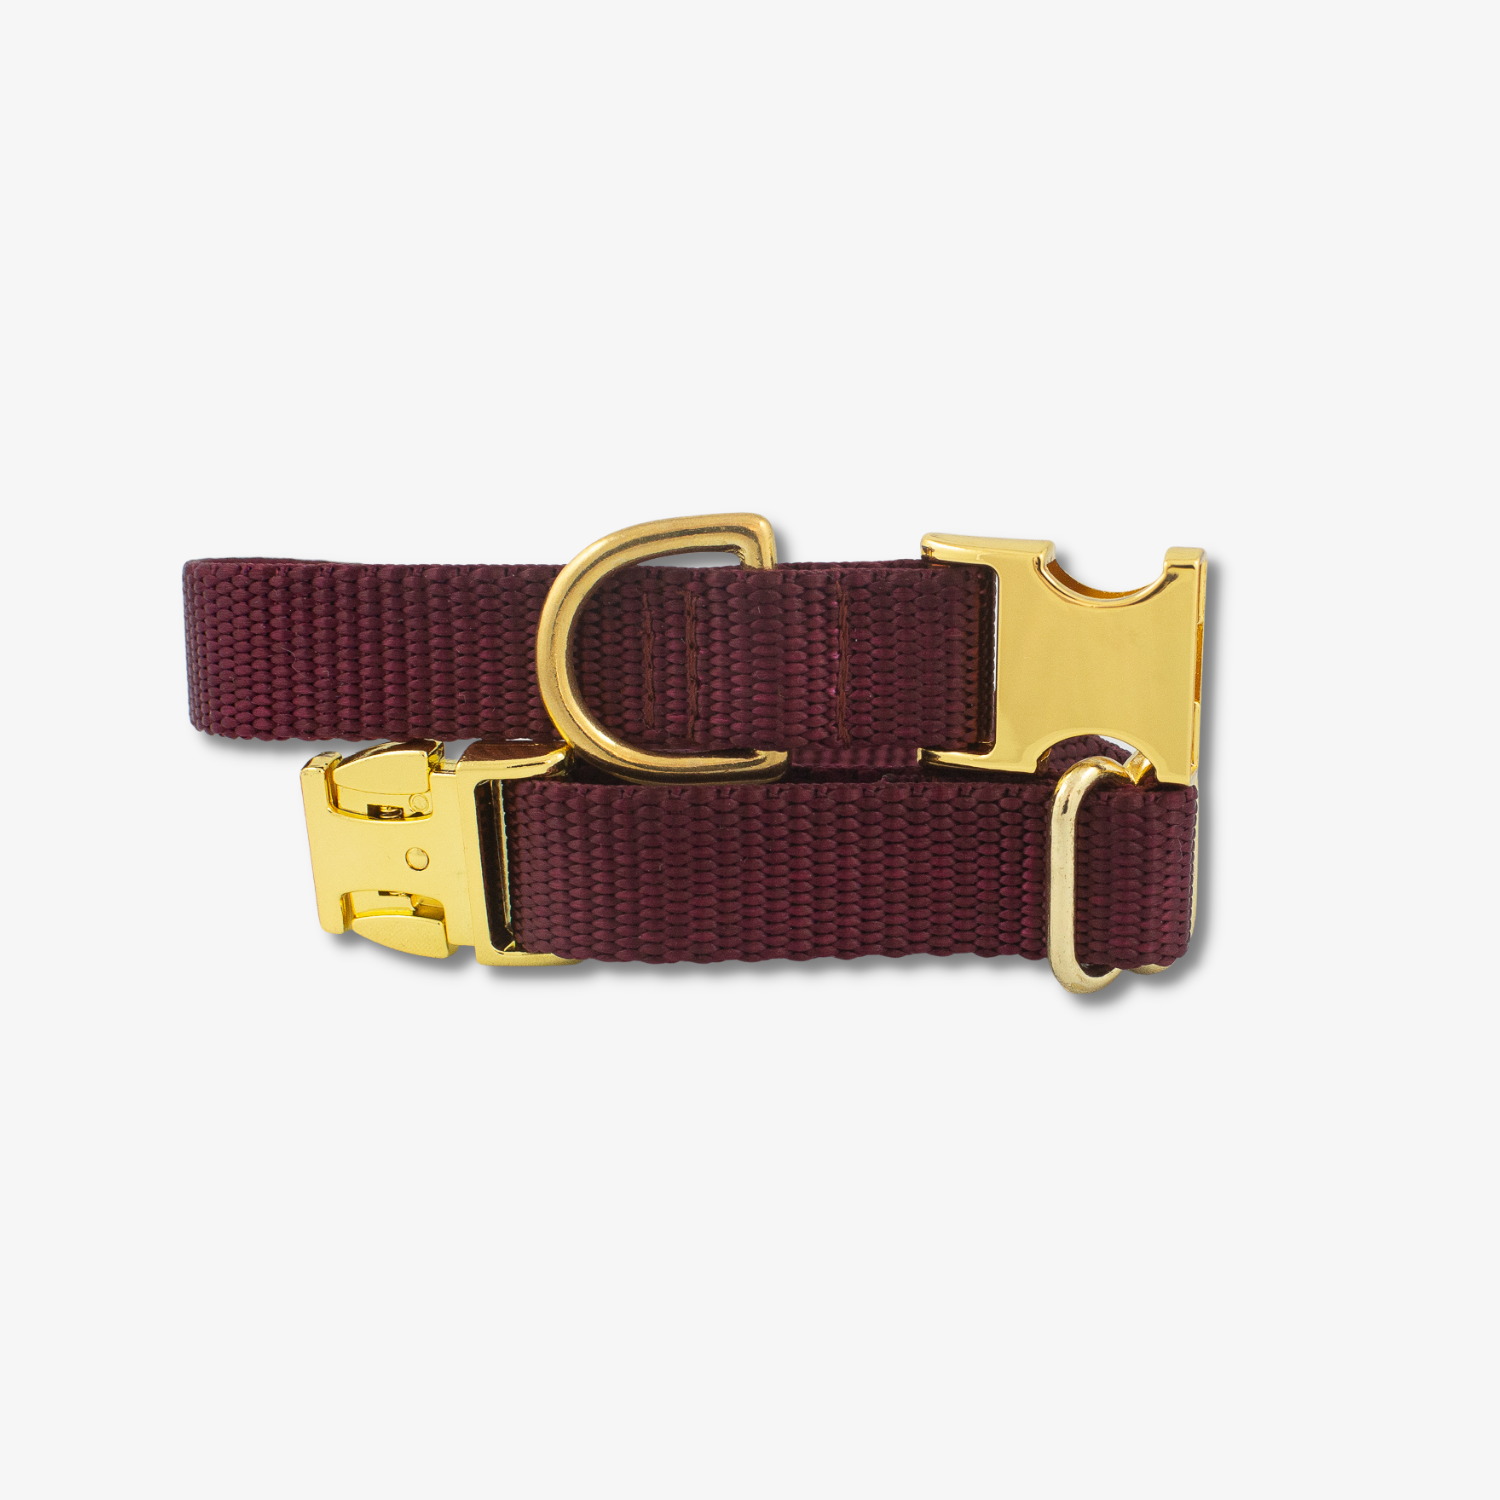 burgundy dog collar with gold buckles